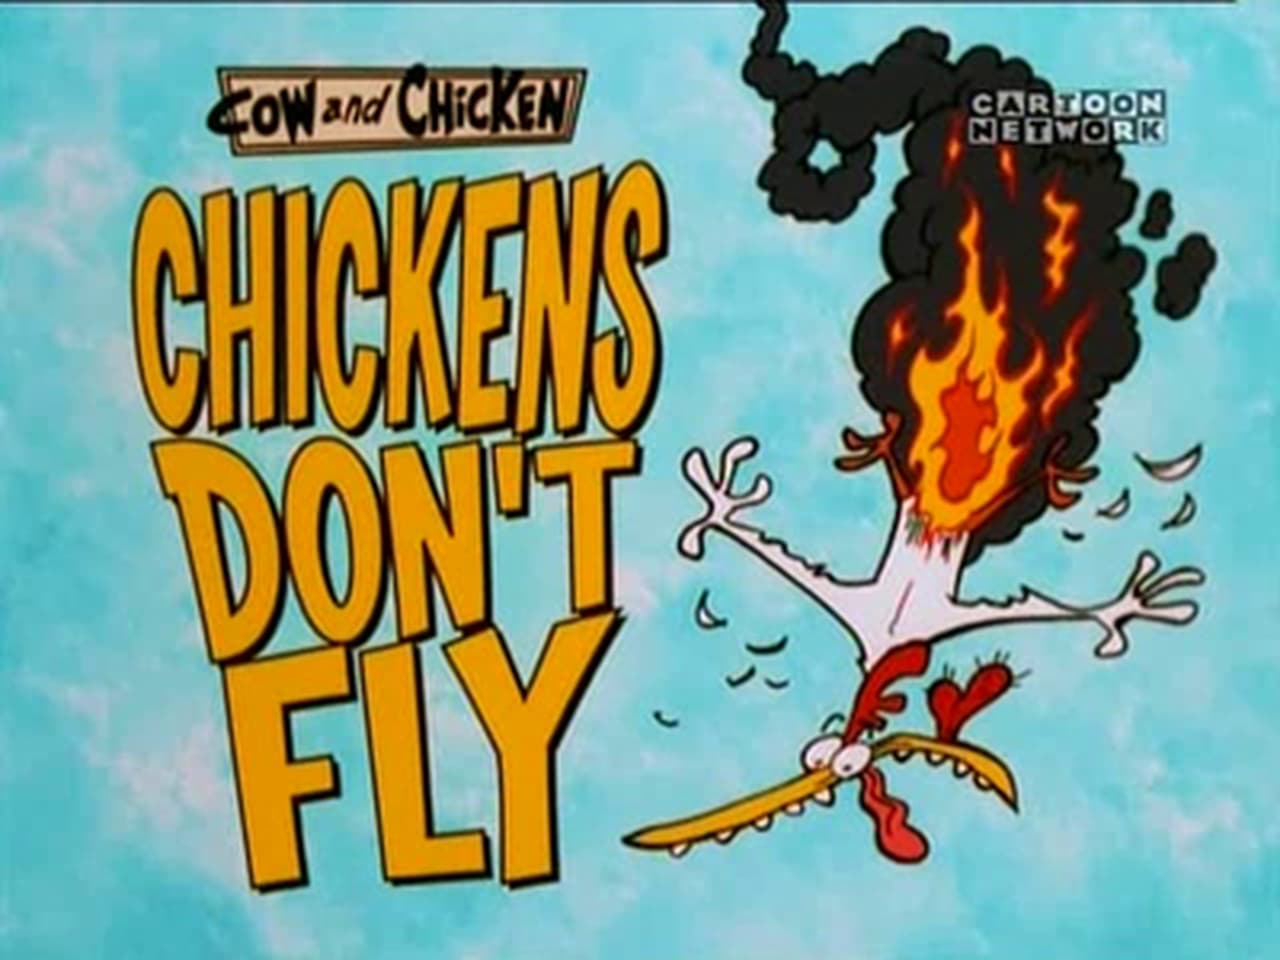 Cow and Chicken - Season 3 Episode 13 : Chickens Don't Fly